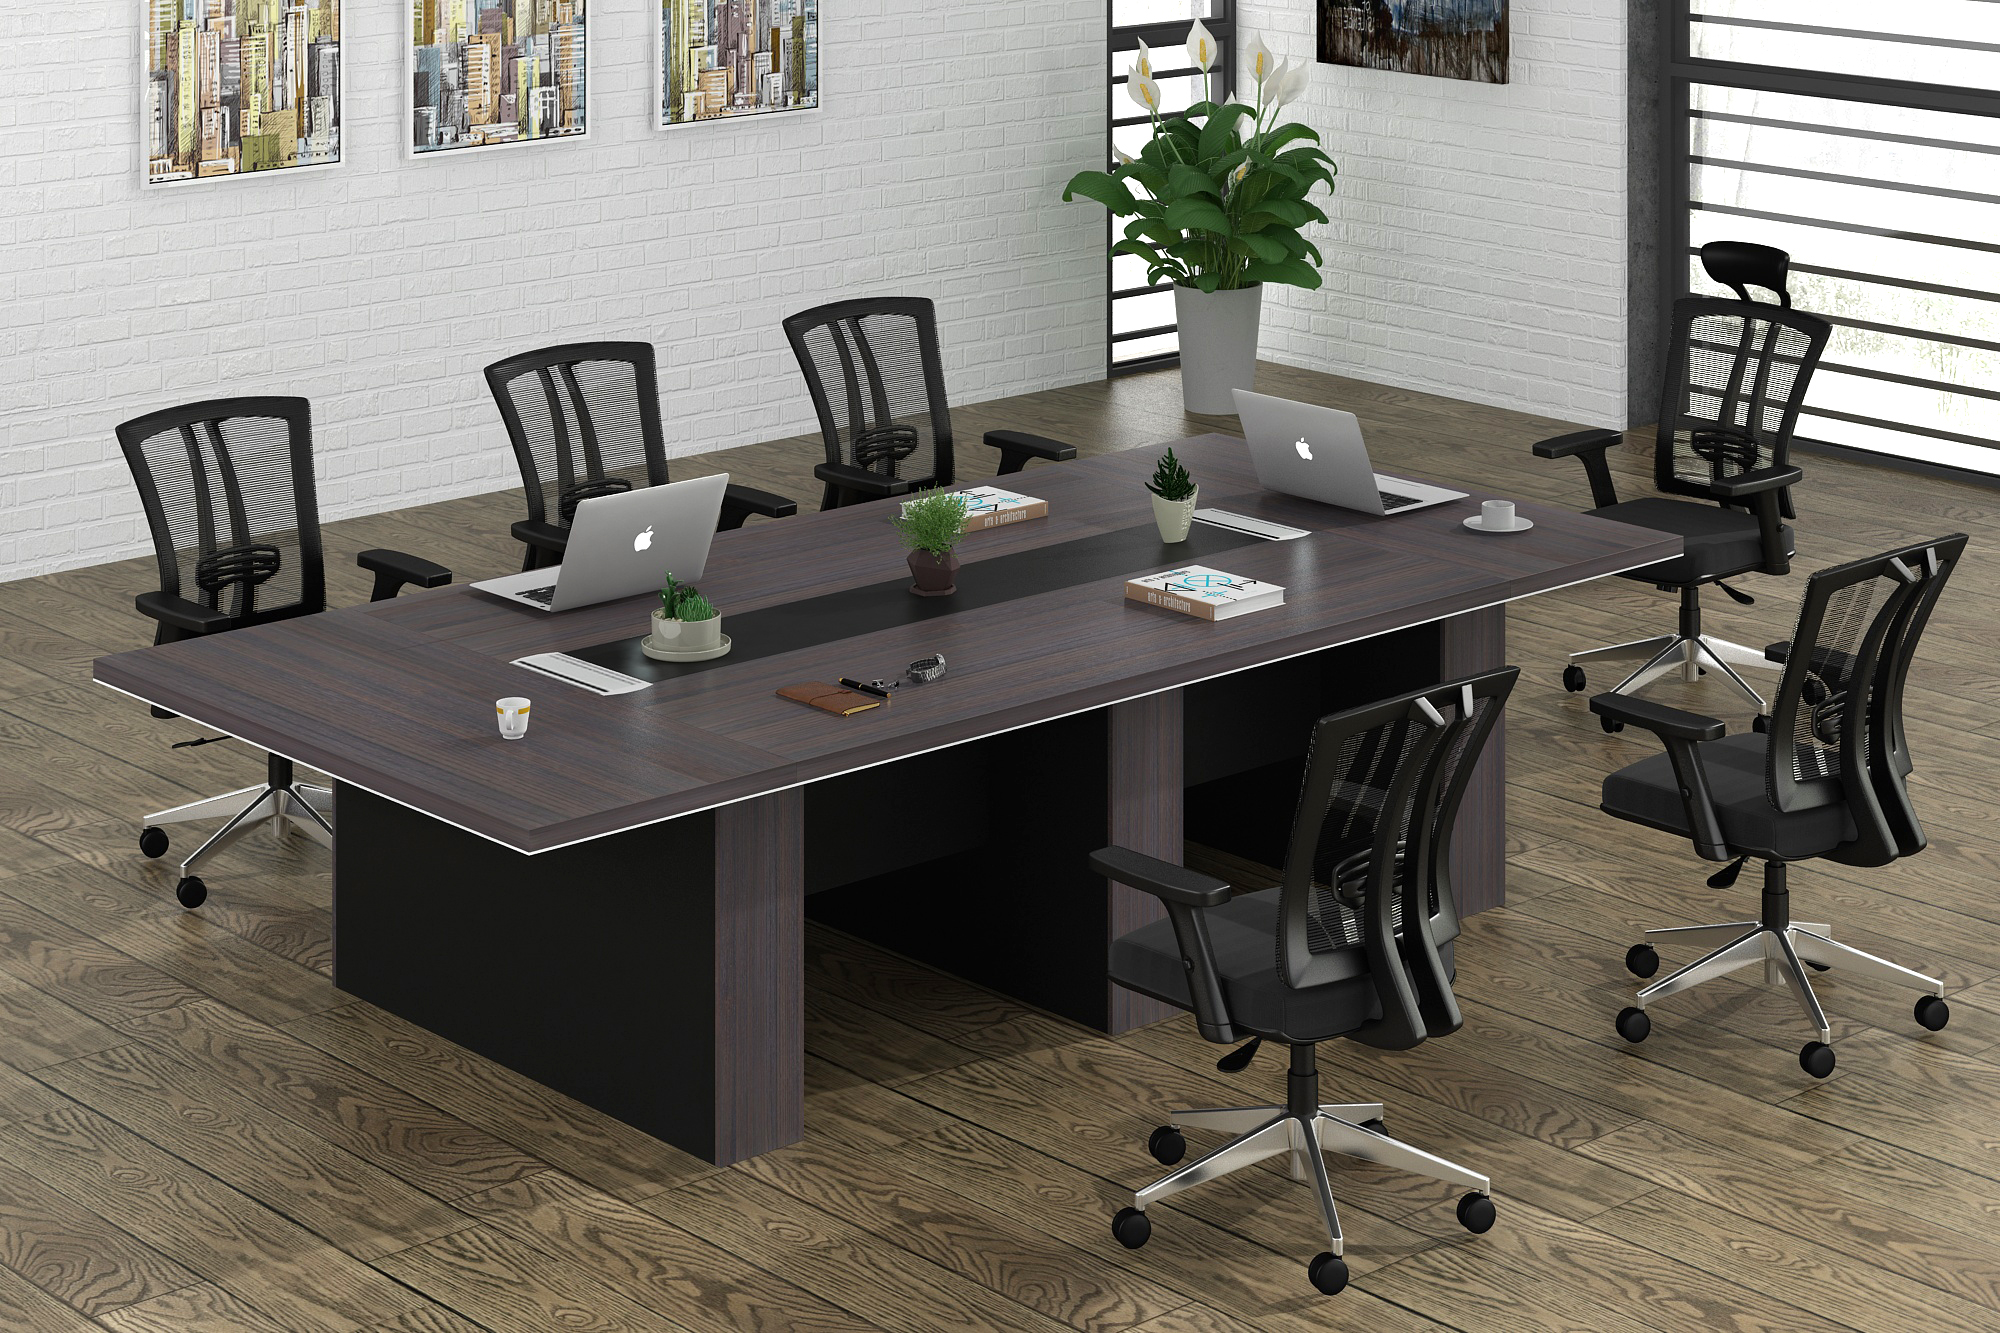 Conference Room Table Design - Bespoke Conference Tables | Bodeniwasues